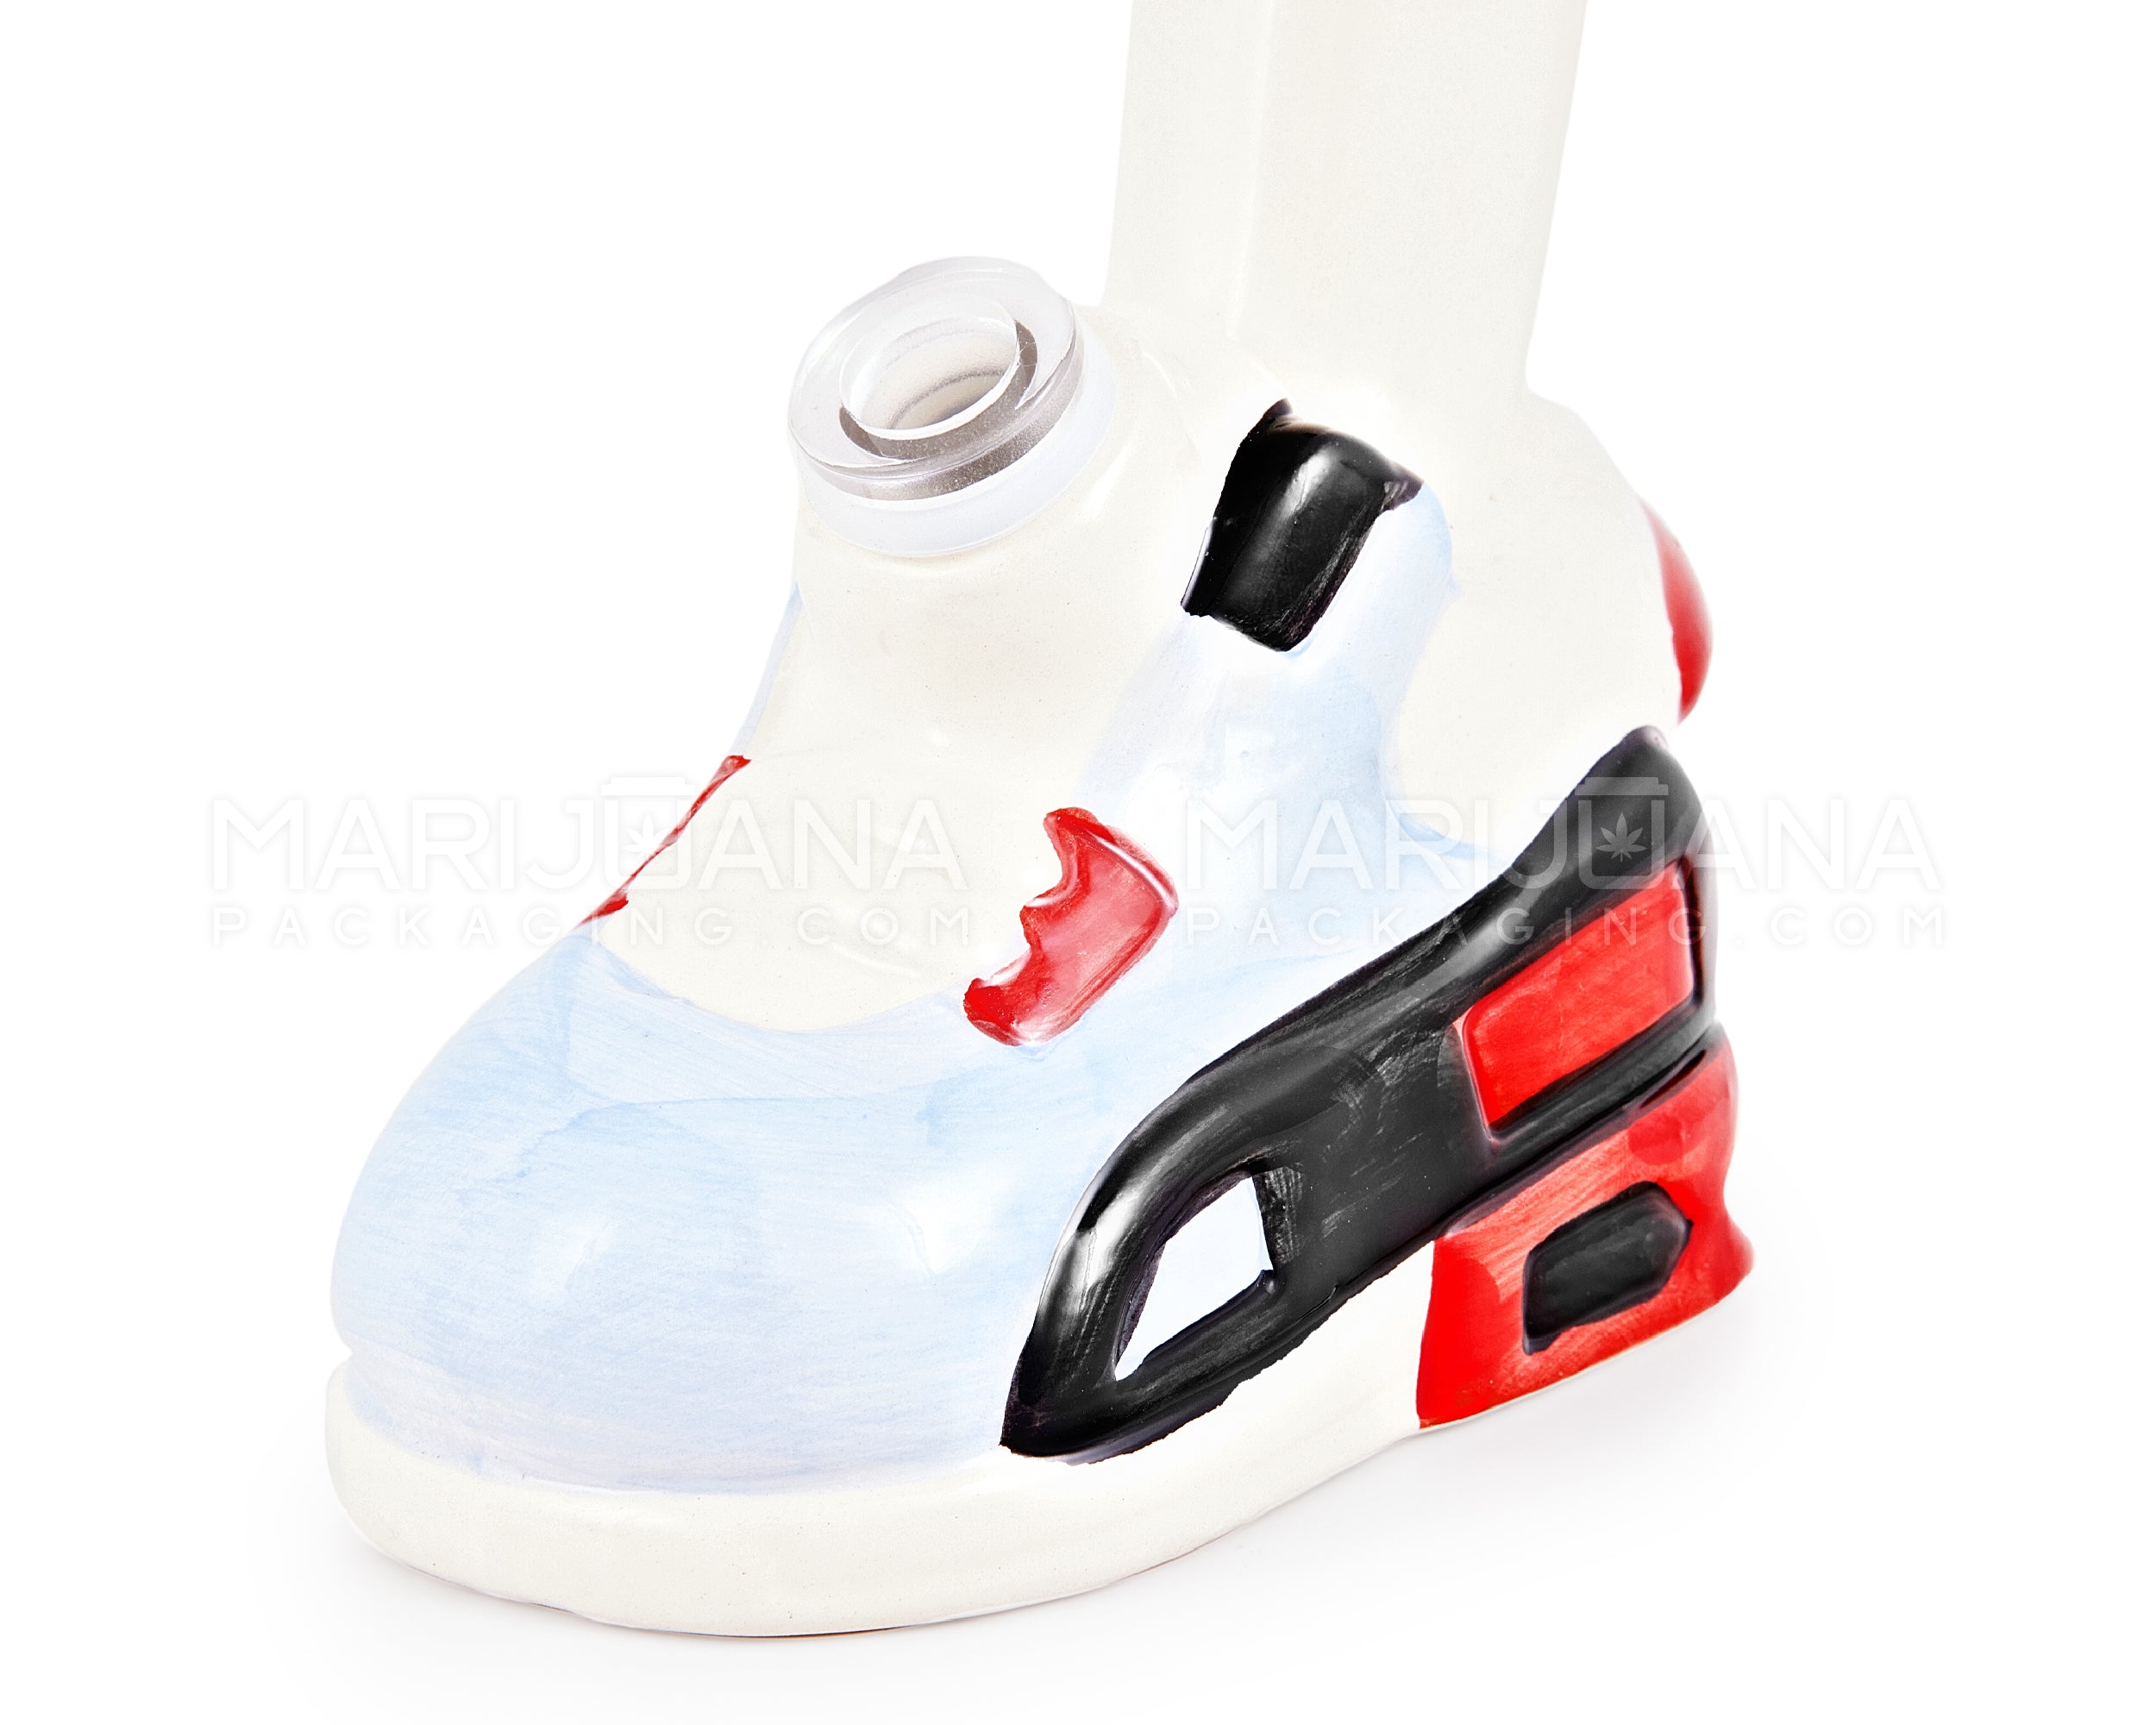 Classic Sneaker Painted Ceramic Pipe | 8.5in Tall - 14mm Bowl - Mixed - 3